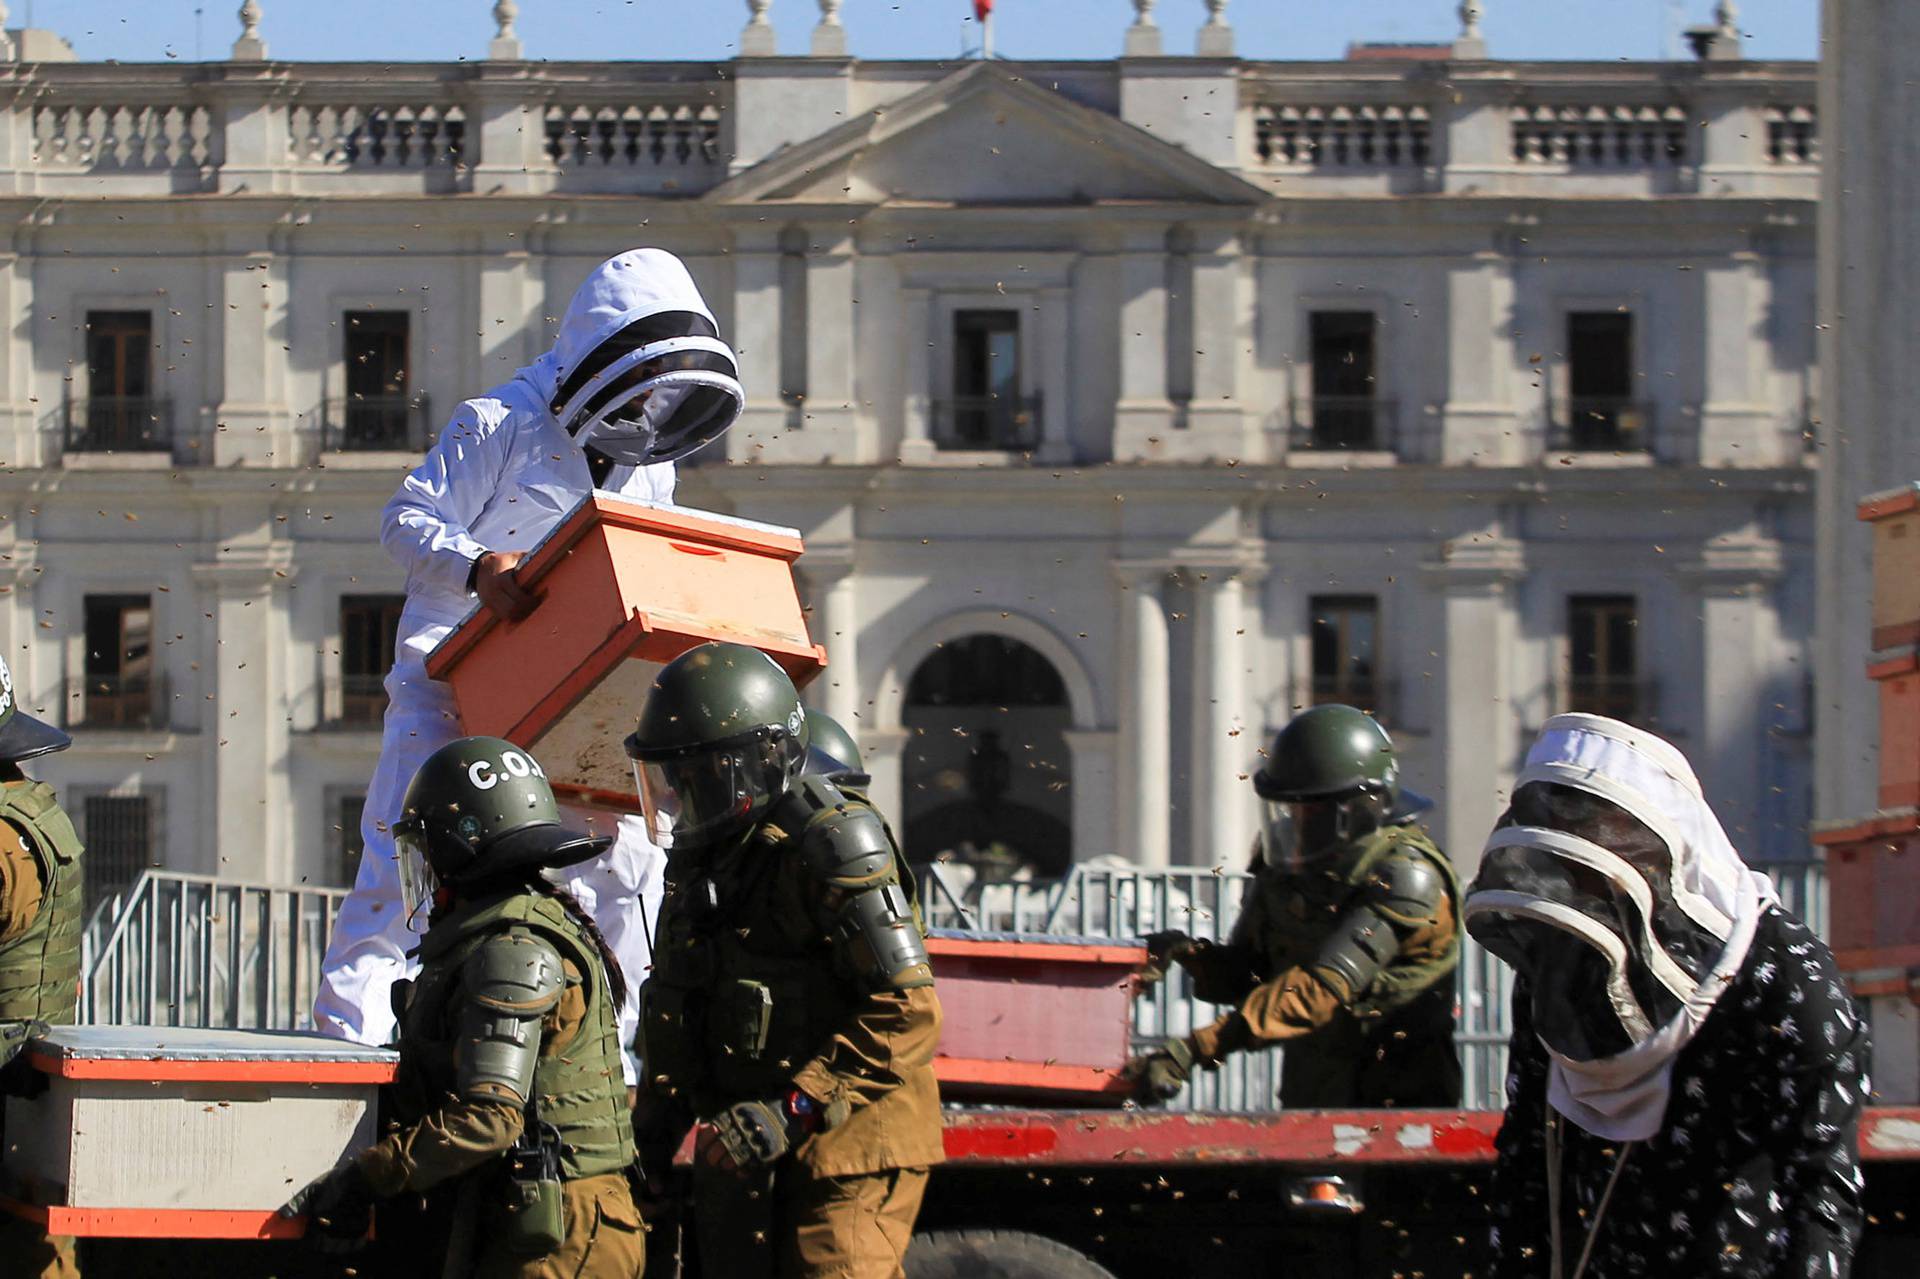 Beekeepers take part in a protest with honeycombs full of bees in front of the Chilean presidential palace in Santiago